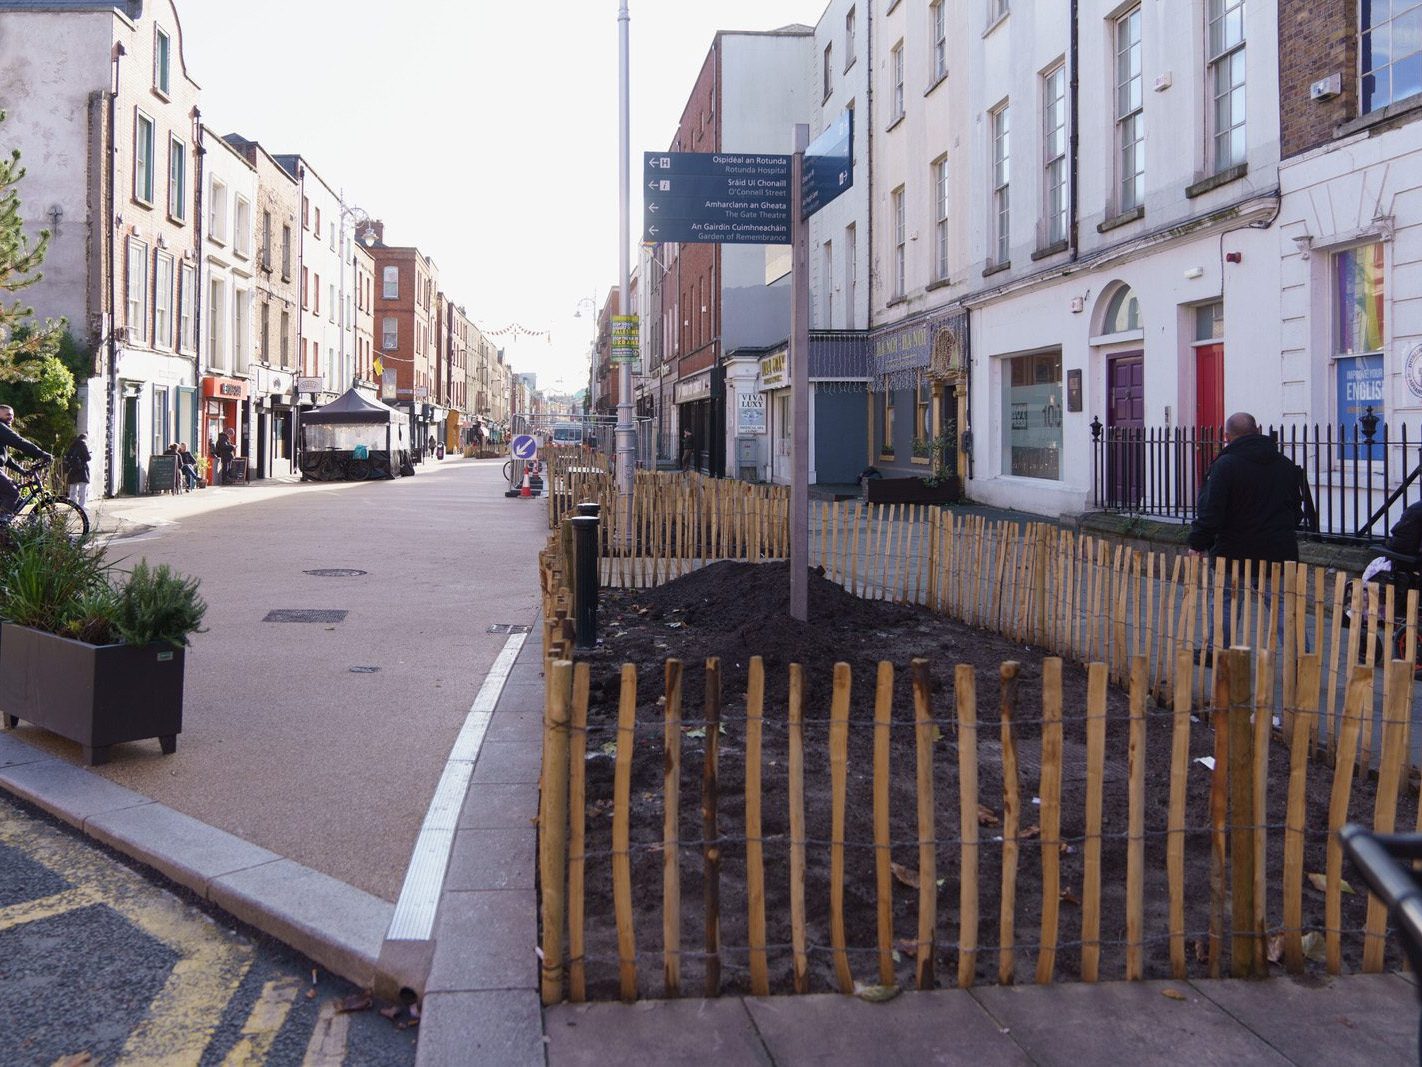 CAPEL STREET IS STILL A W.I.P. [THE PERIOD BETWEEN HALLOWEEN AND CHRISTMAS]-224776-1